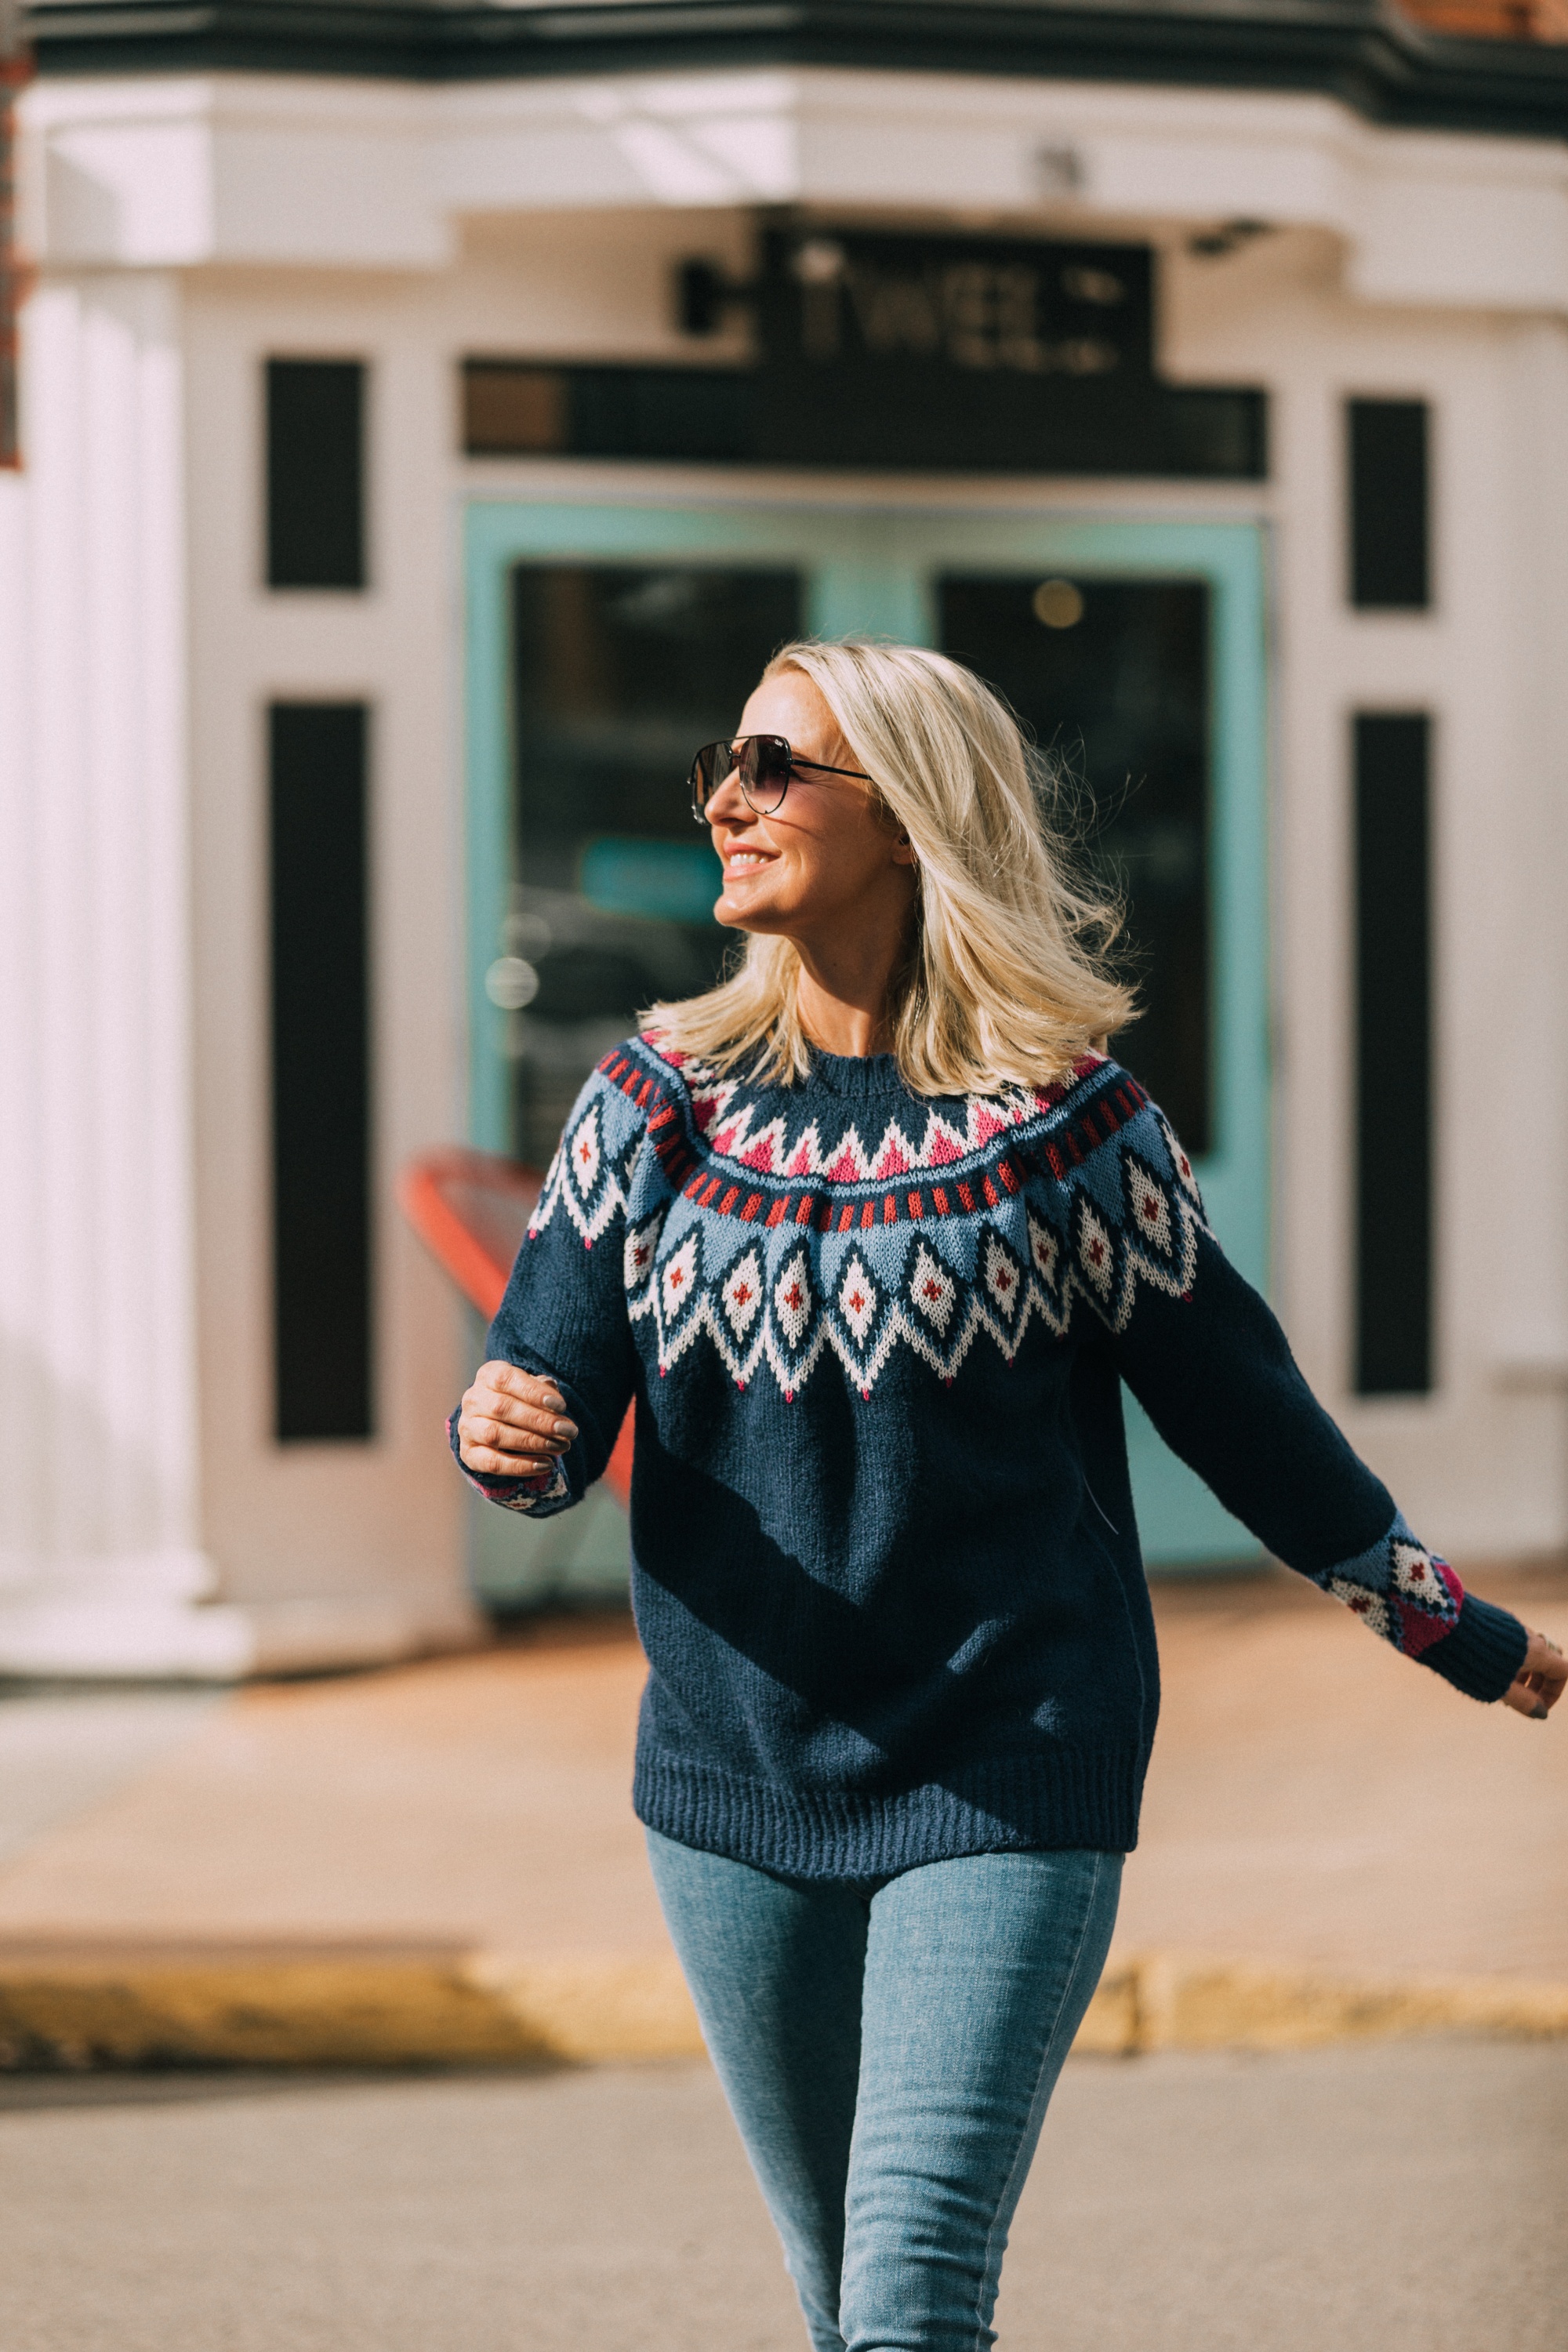 cheap affordable navy fair isle sweater work with blue jeans outfit JCPenney telluride colorado